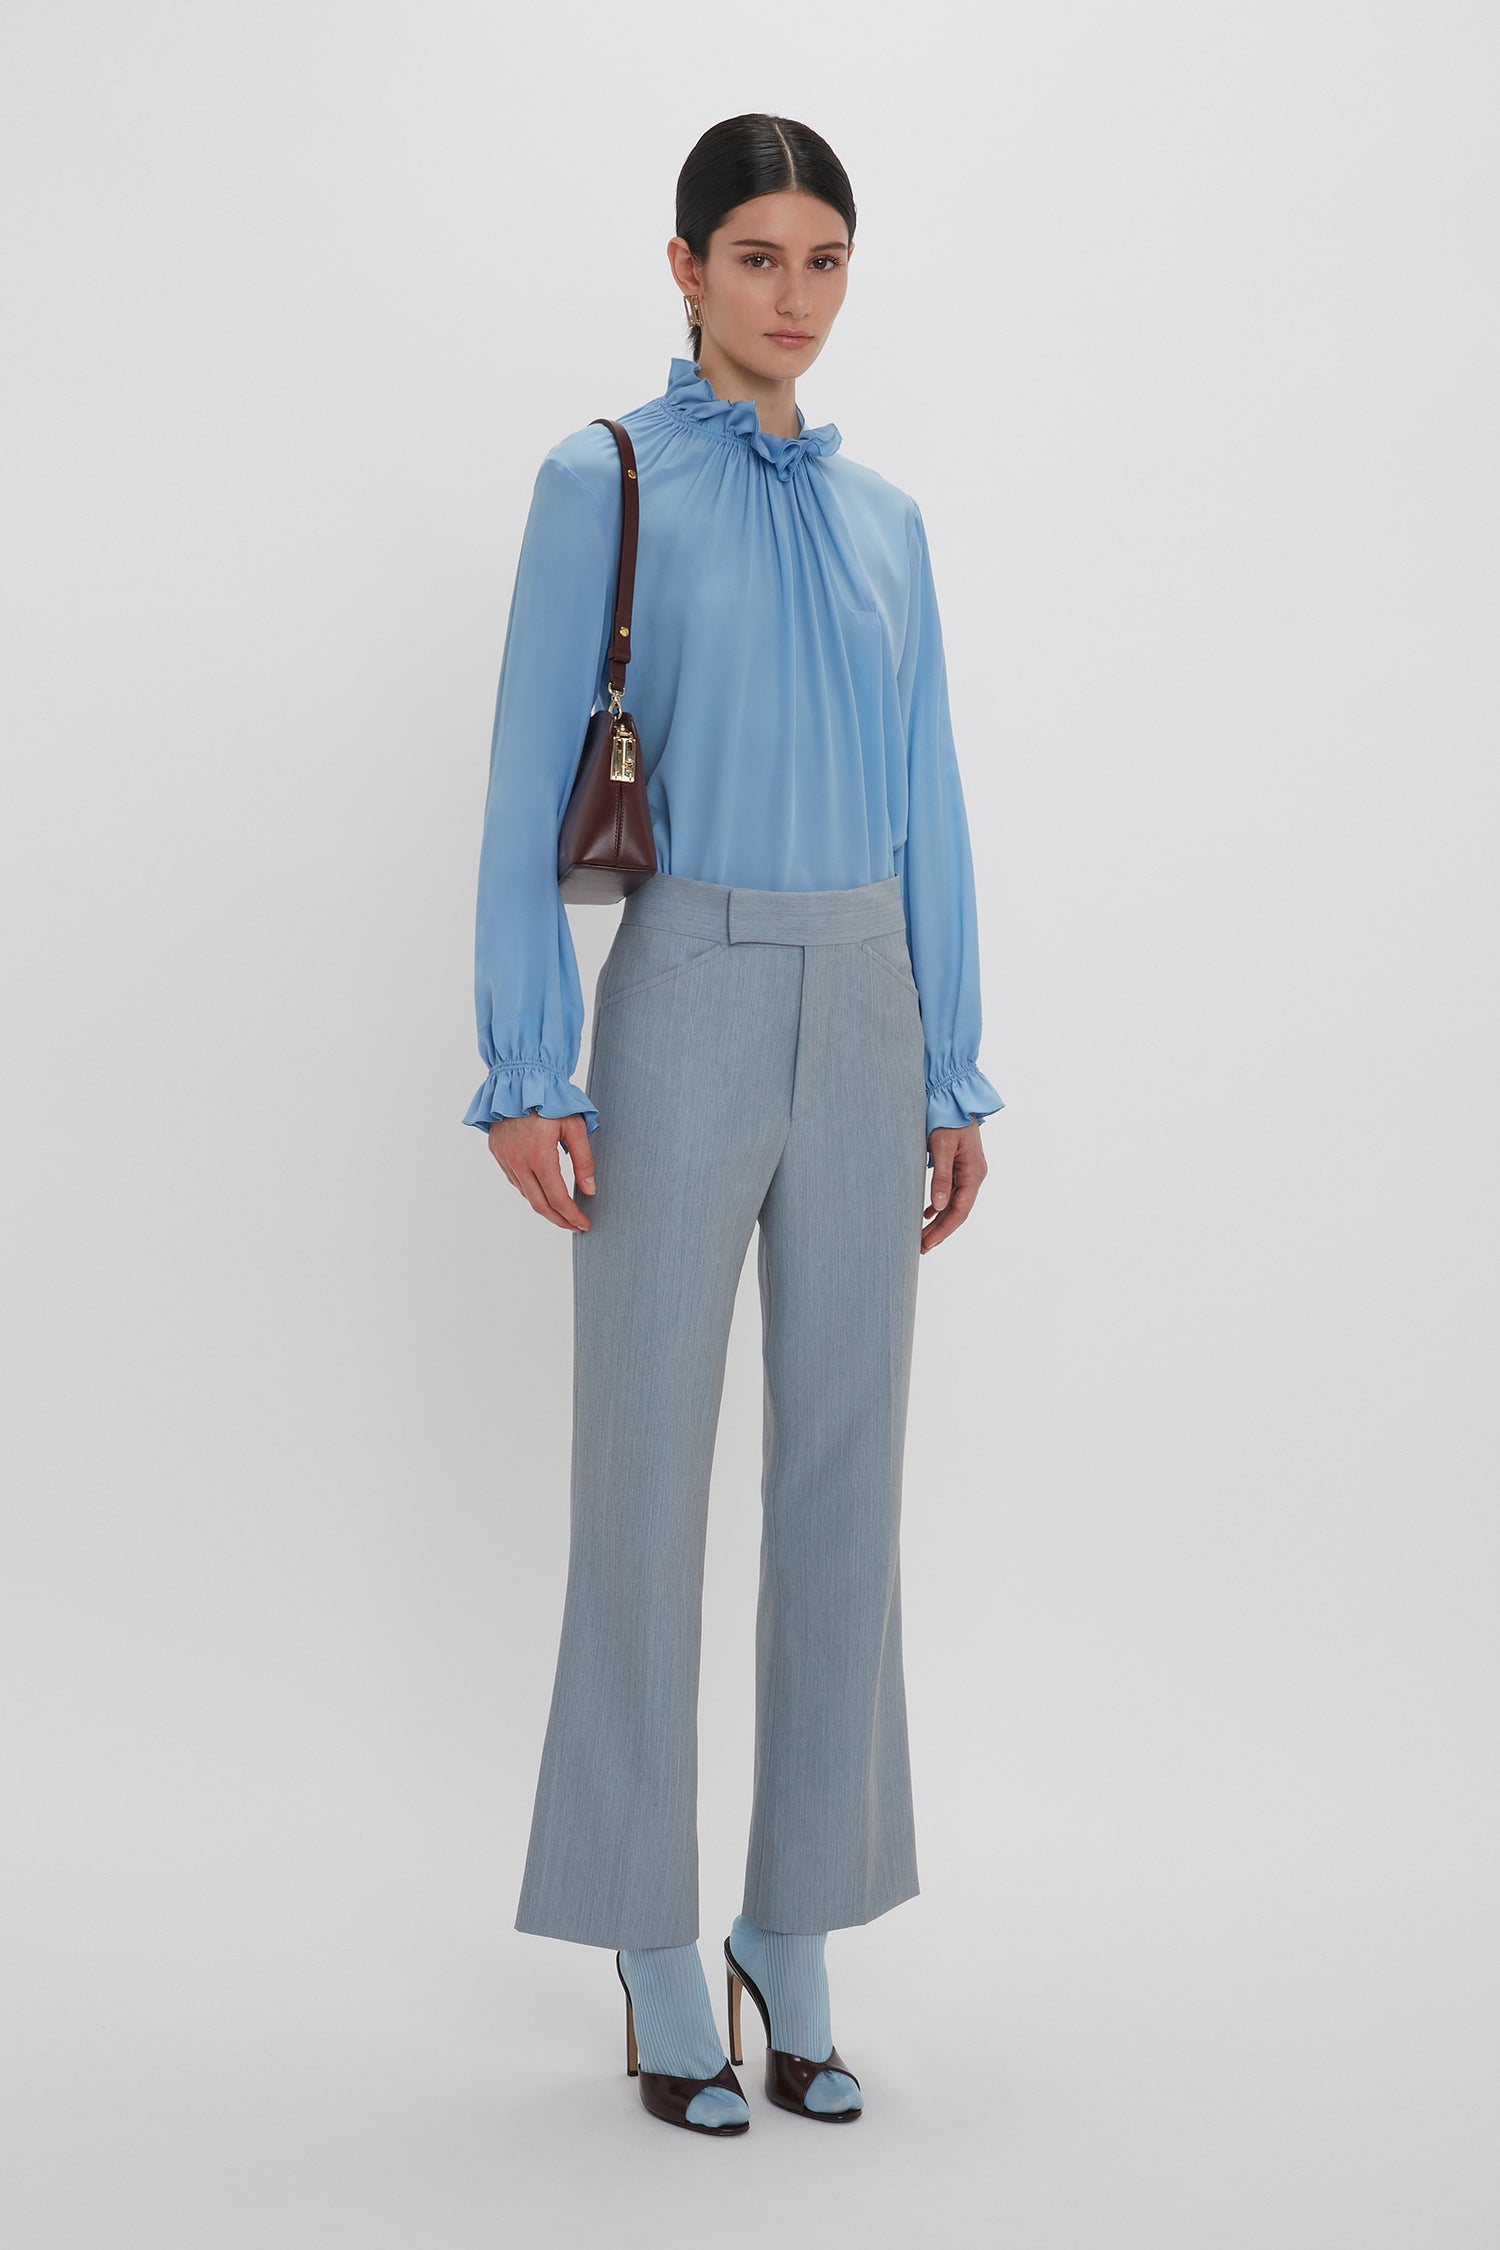 A person is standing against a white background, wearing an Exclusive Ruffle Neck Blouse In Cornflower Blue by Victoria Beckham made from crepe de chine fabric and light gray pants, holding a brown handbag over their shoulder. They have dark hair and are wearing blue high-heeled shoes.